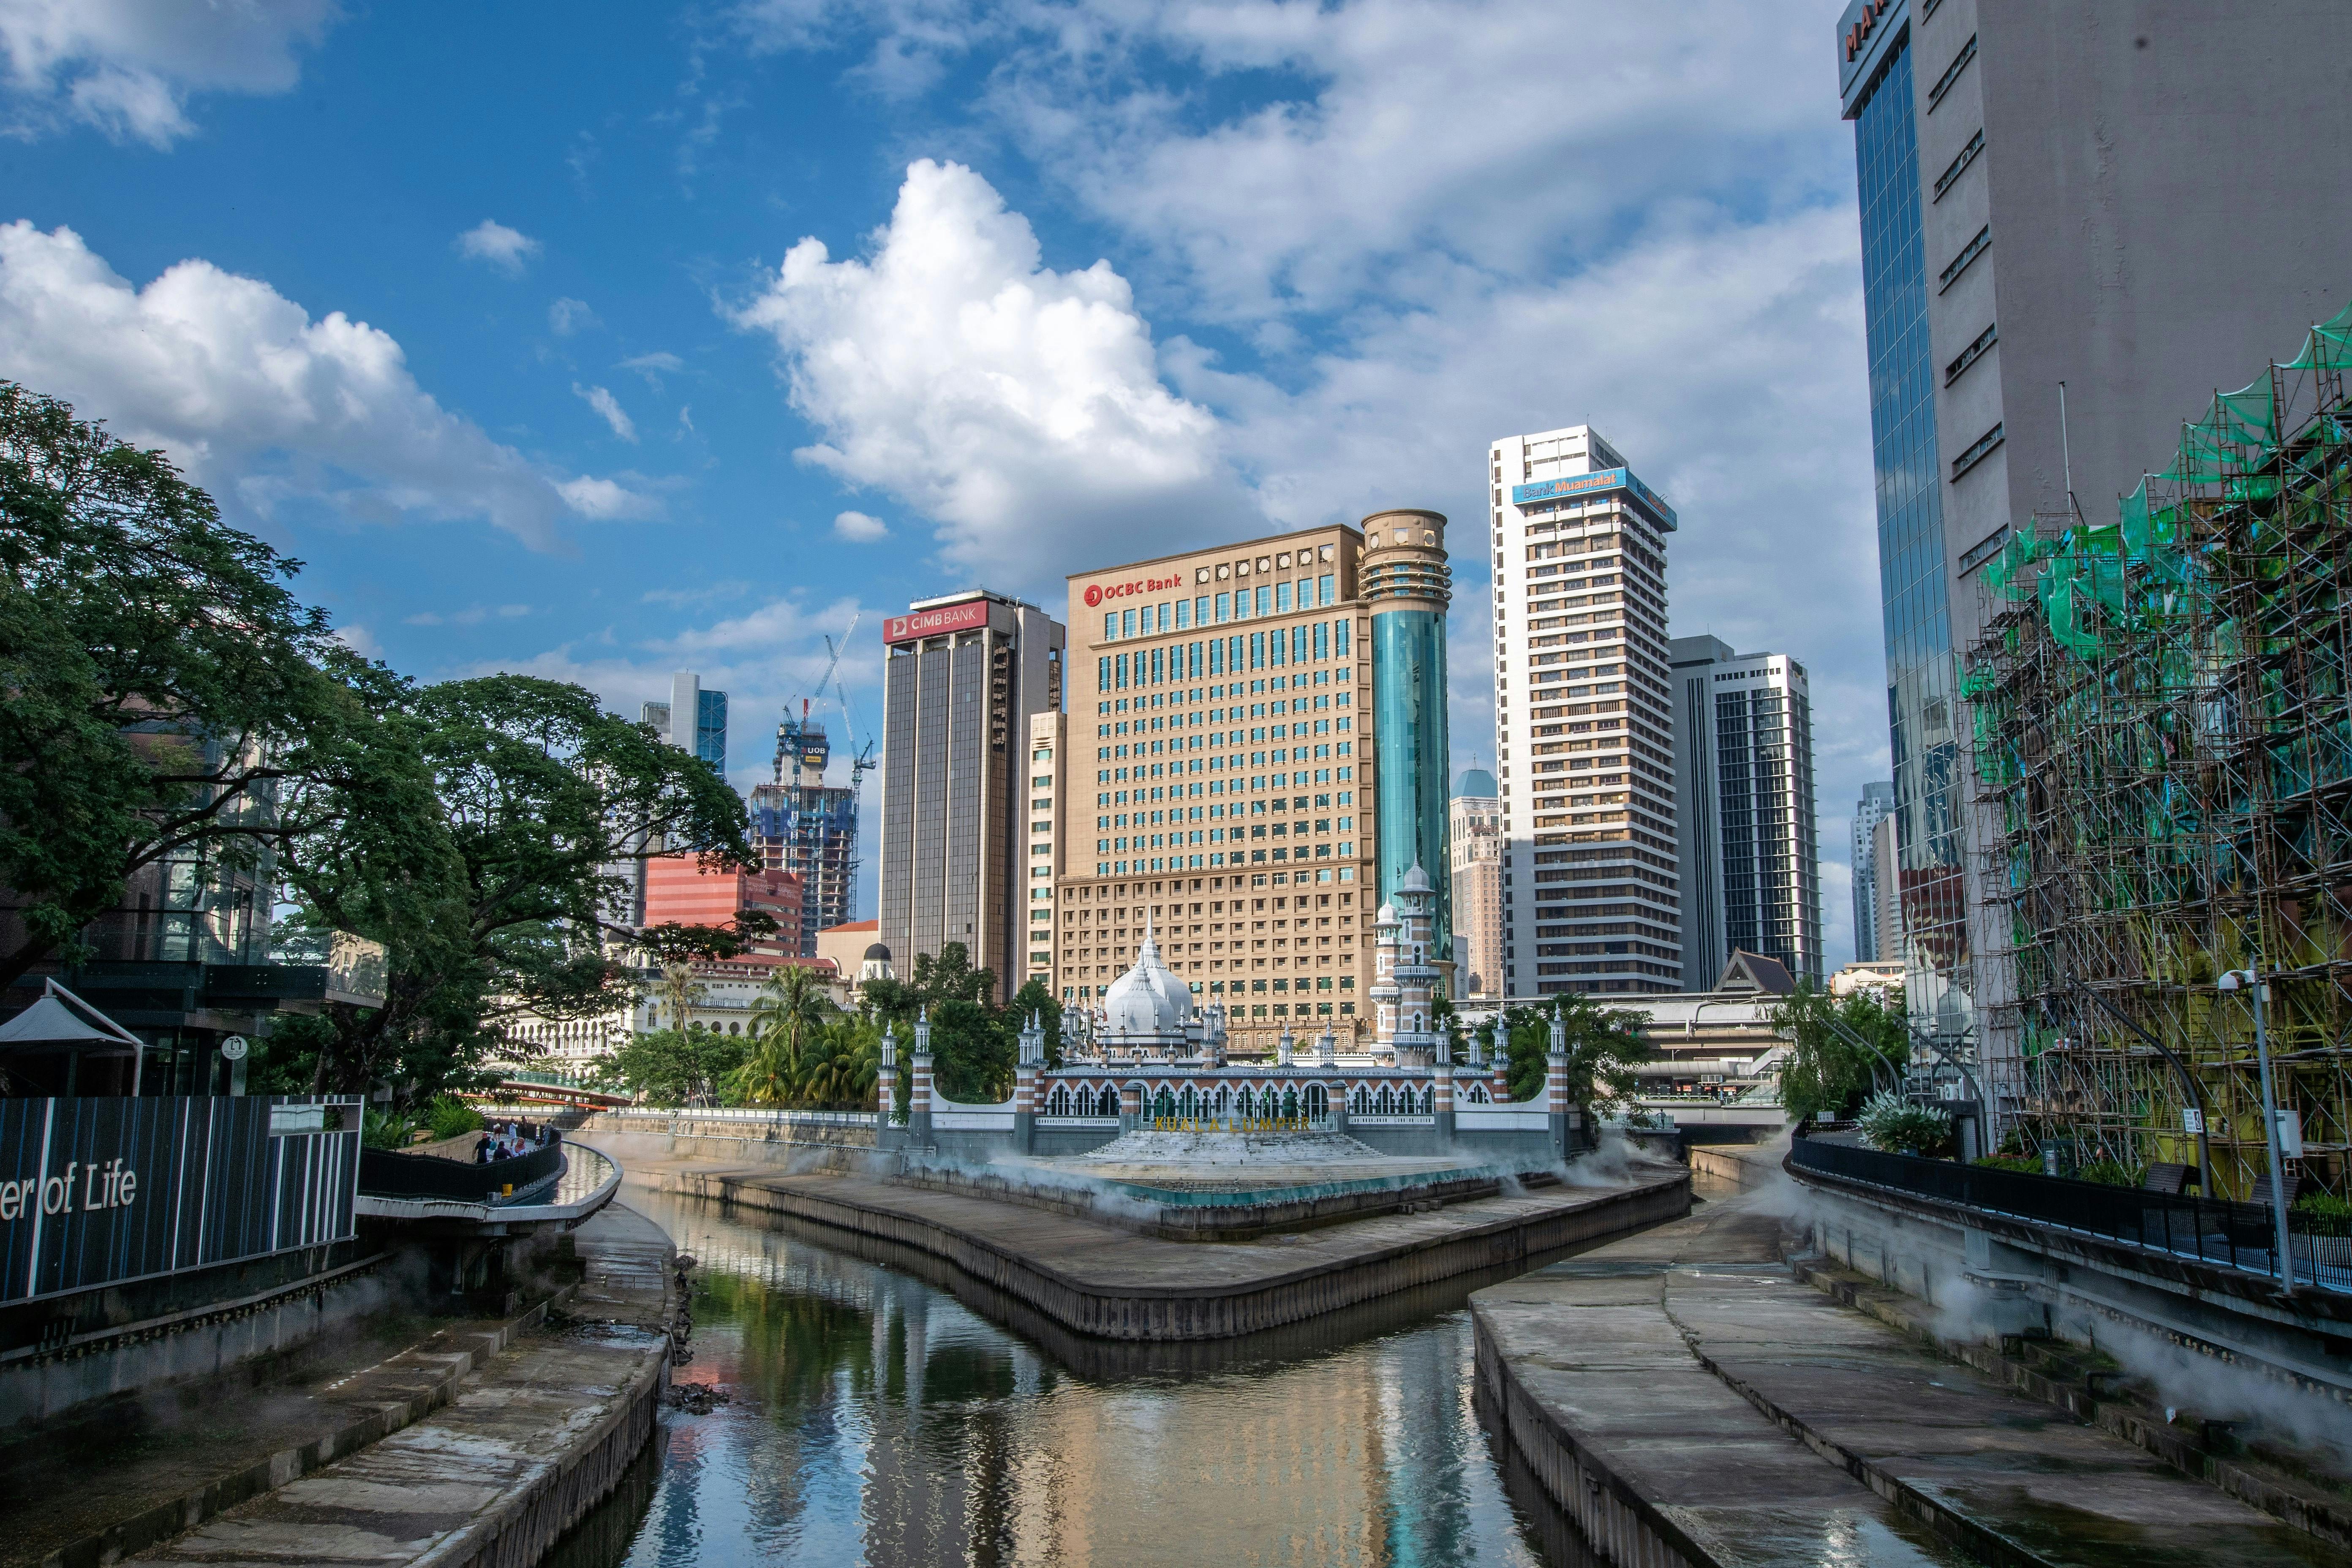 Great Kuala Lumpur tour with 21 attractions and KL Tower tickets